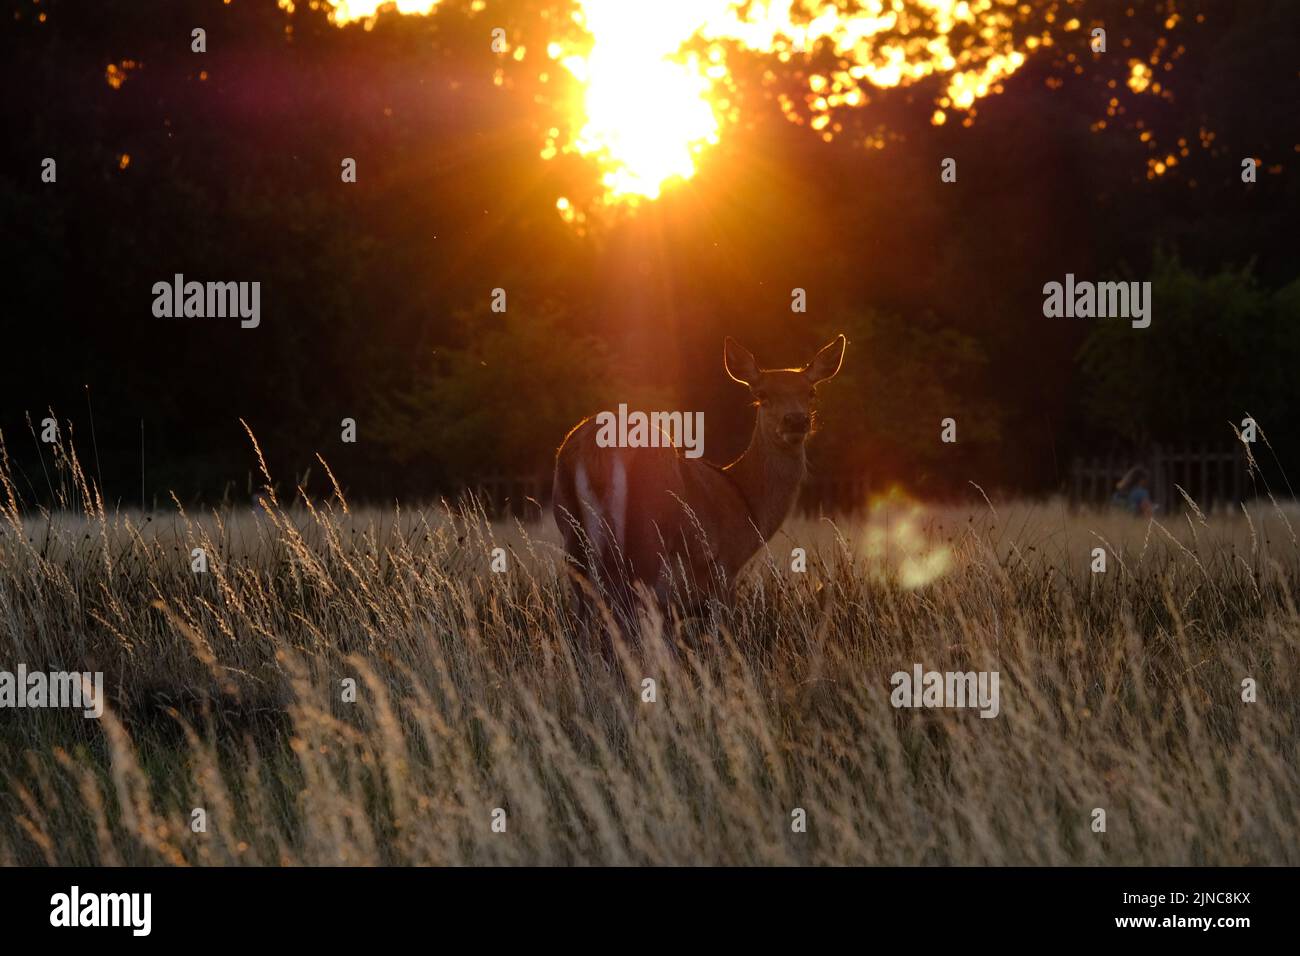 London, UK, 10th Aug, 2022.  A red deer during sunset, surrounded by yellowing grass after continuing hot, sunny conditions, with the driest July on record have left green spaces parched. An Amber Extreme heat warning was issued by the Met Office this week as temperatures are expected to reach mid-30 degrees celsius.  Credit: Eleventh Hour Photography/Alamy Live News Stock Photo